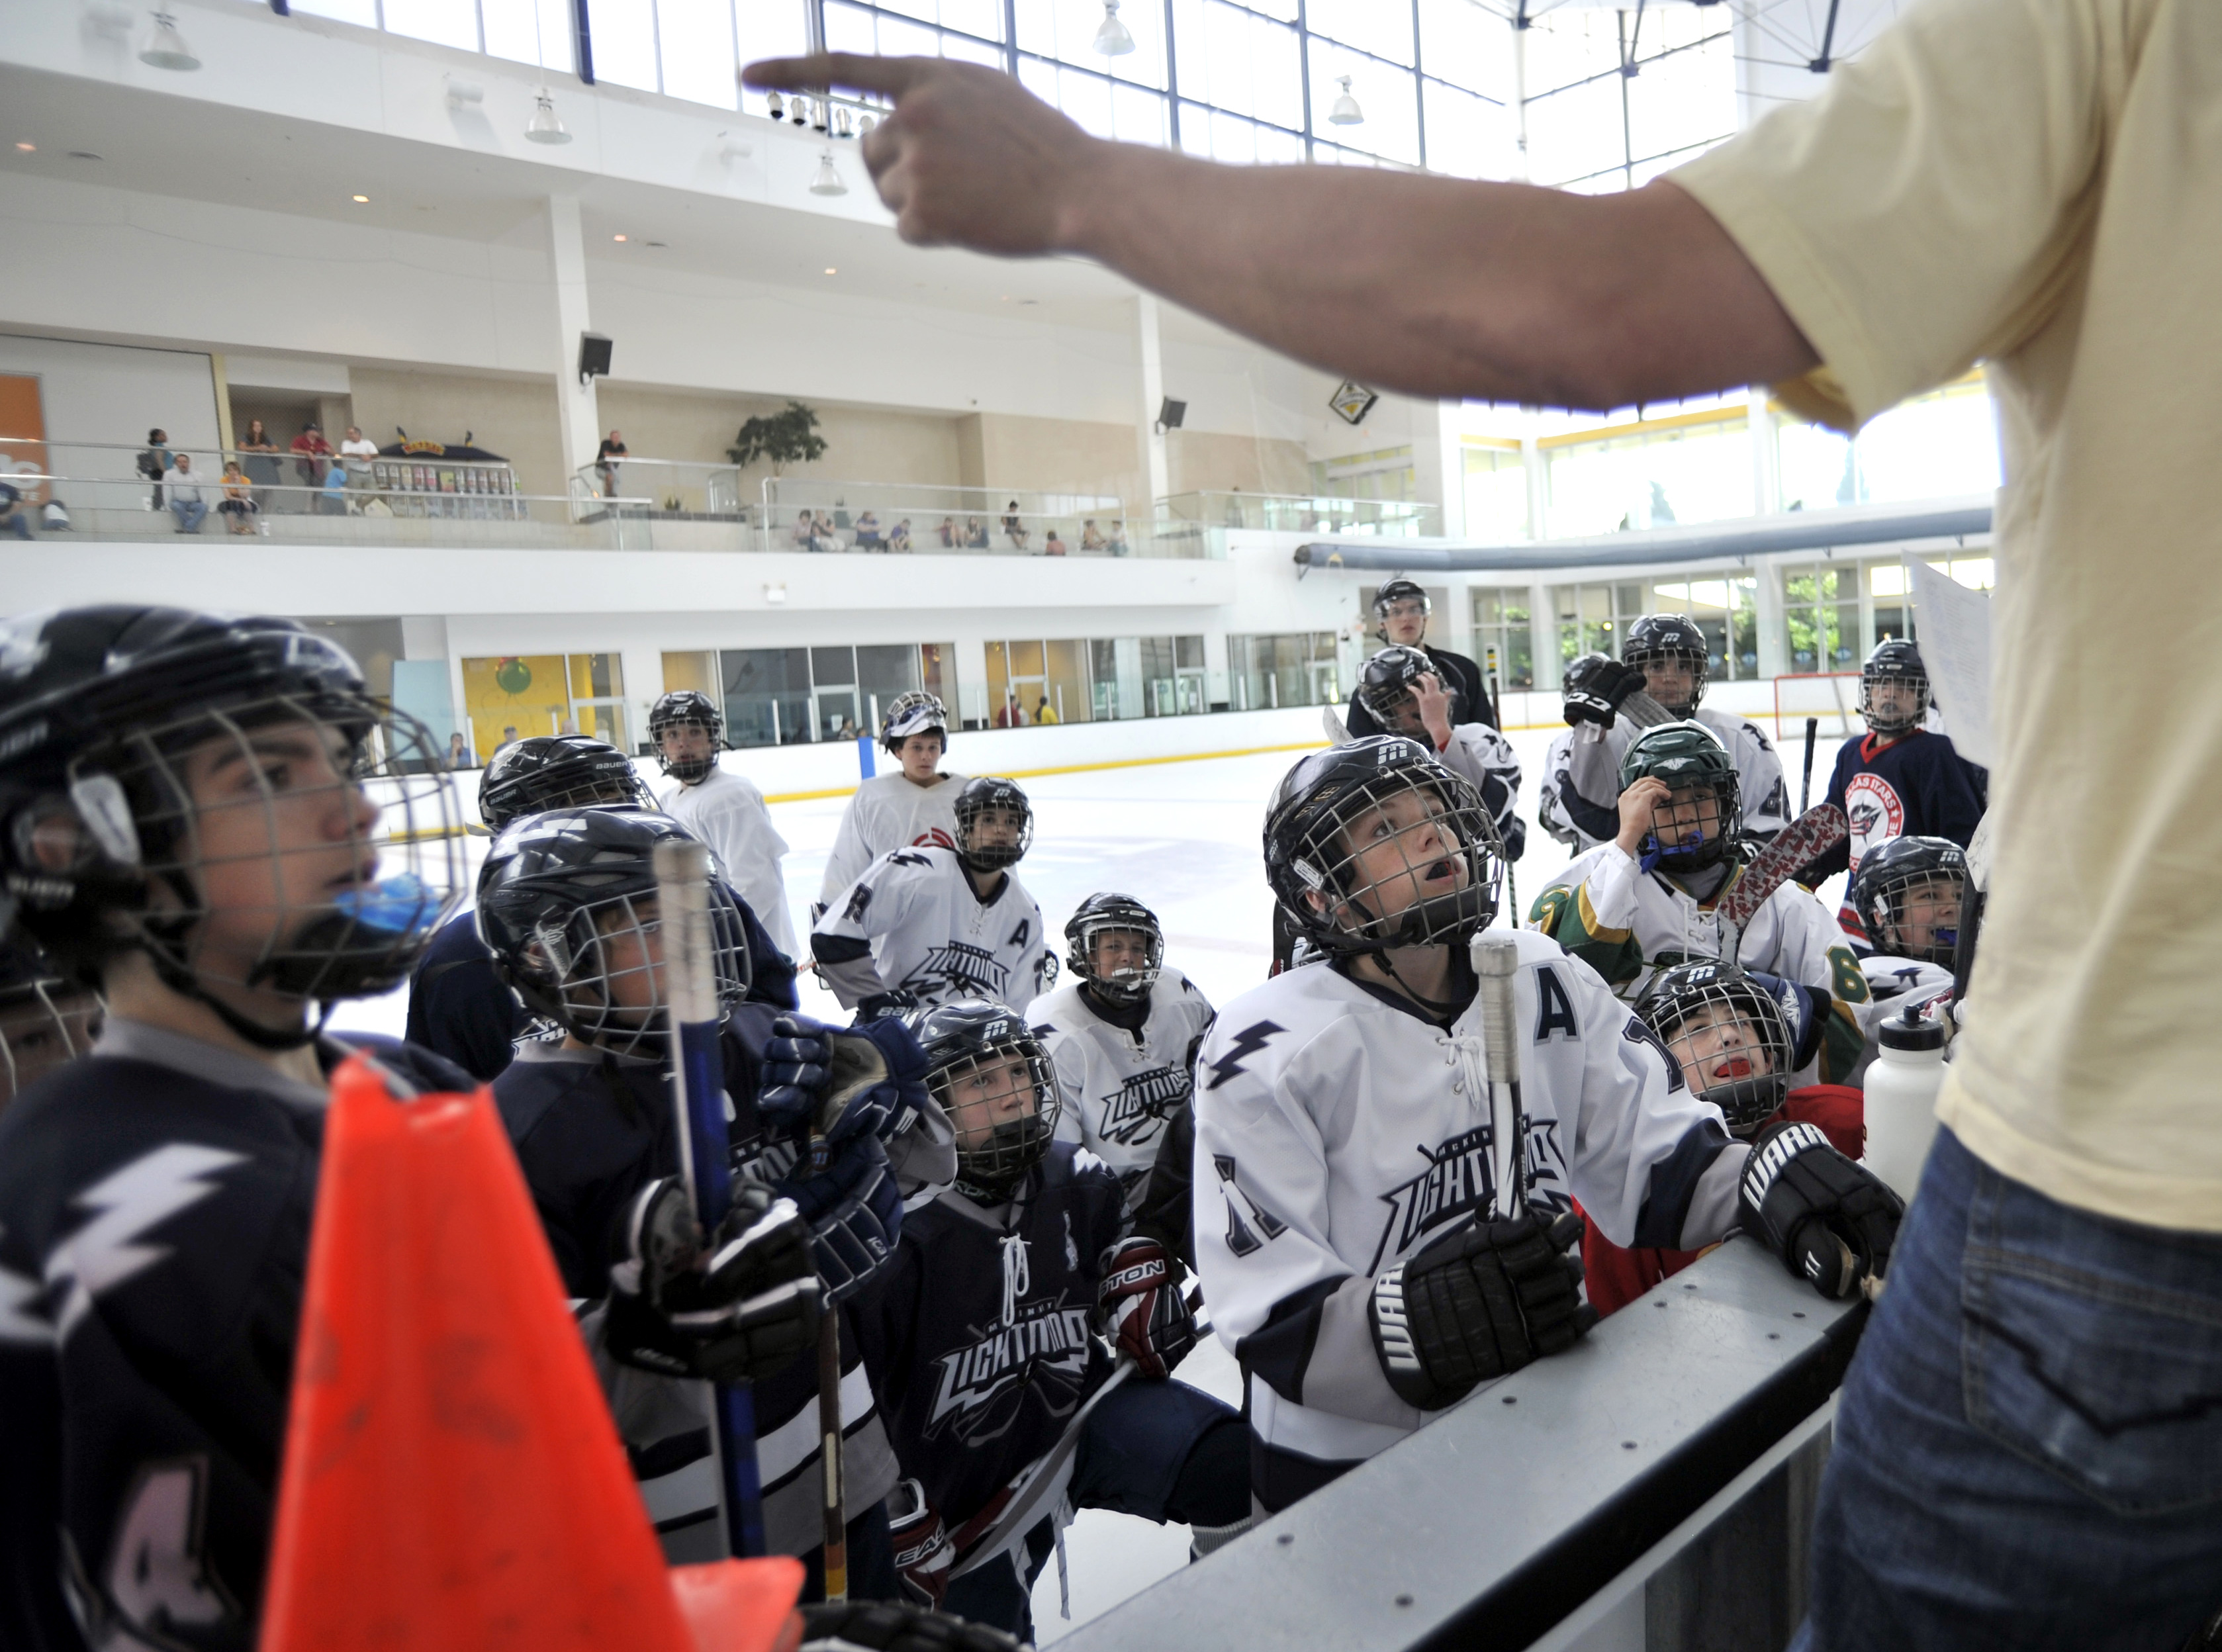 Heika Stars new league creates fallout for youth hockey in North Texas Xxx Pic Hd